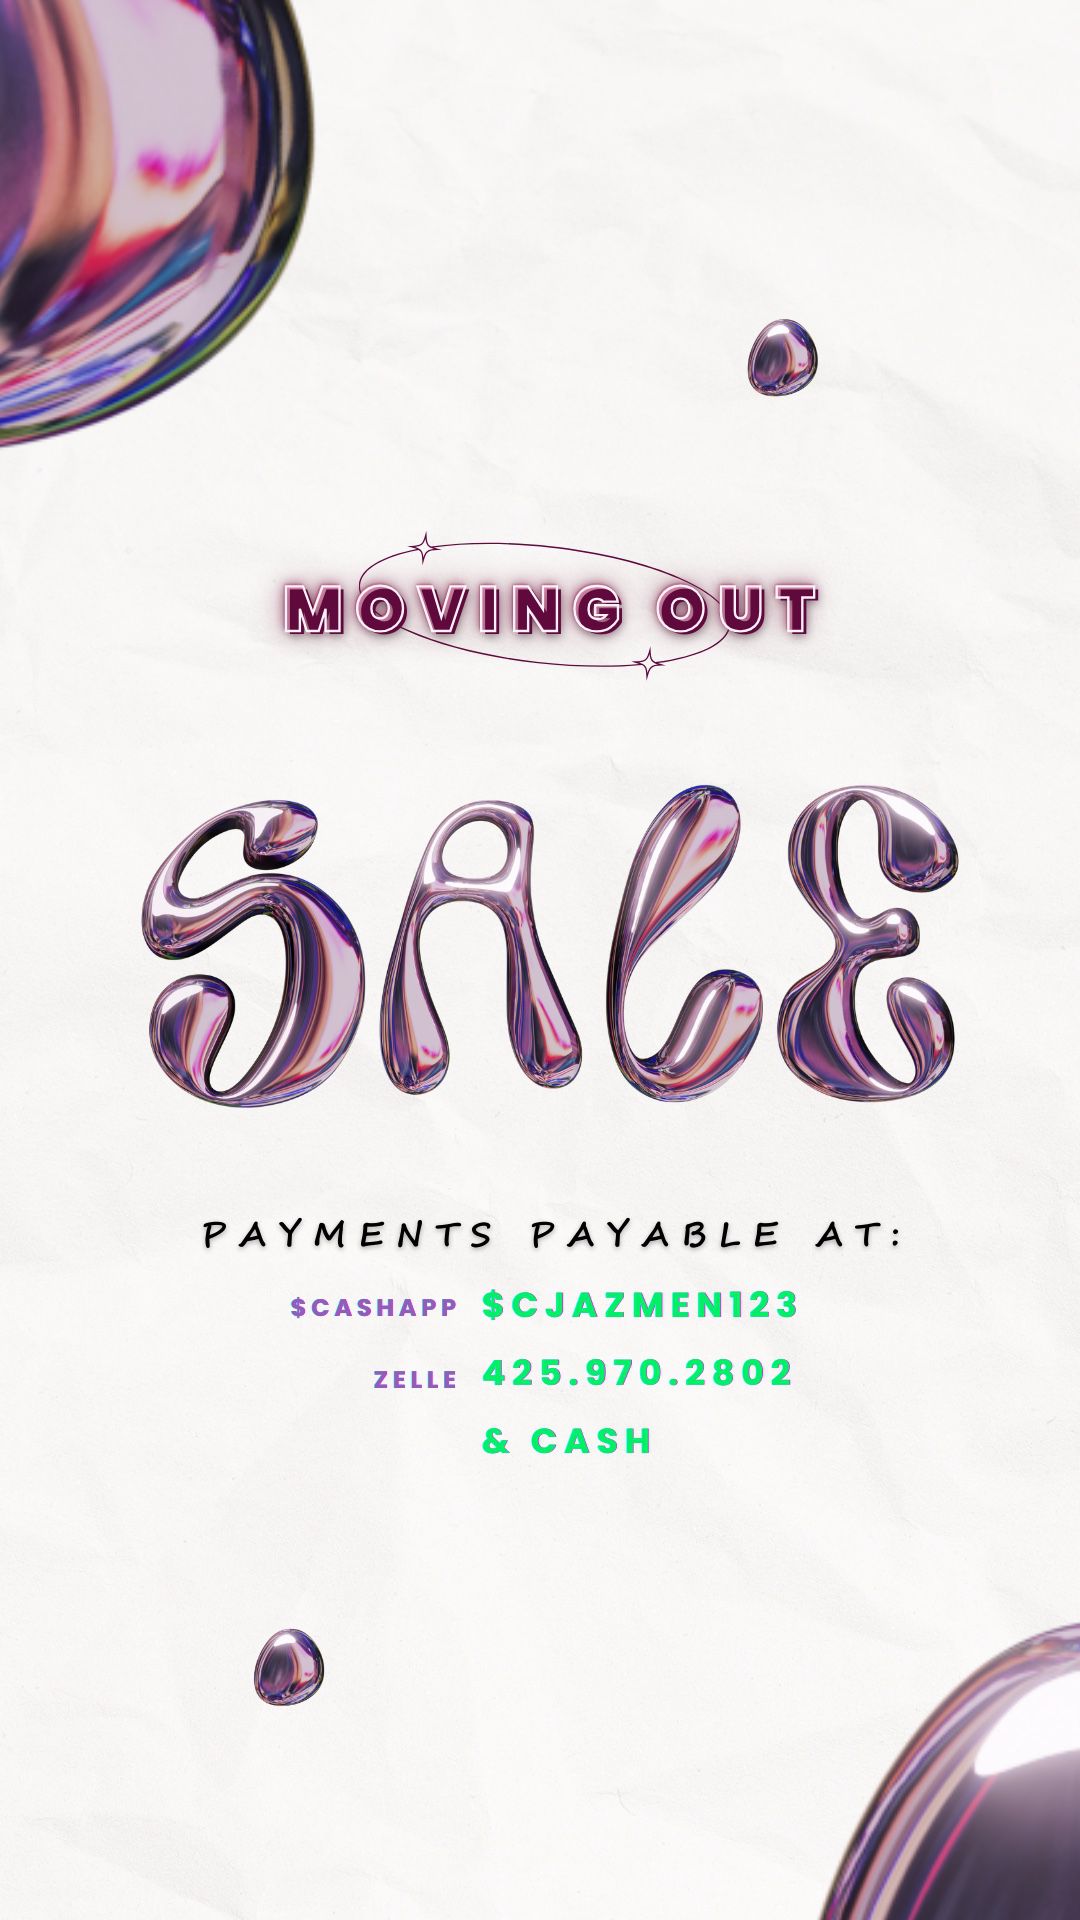 Moving Out Sale